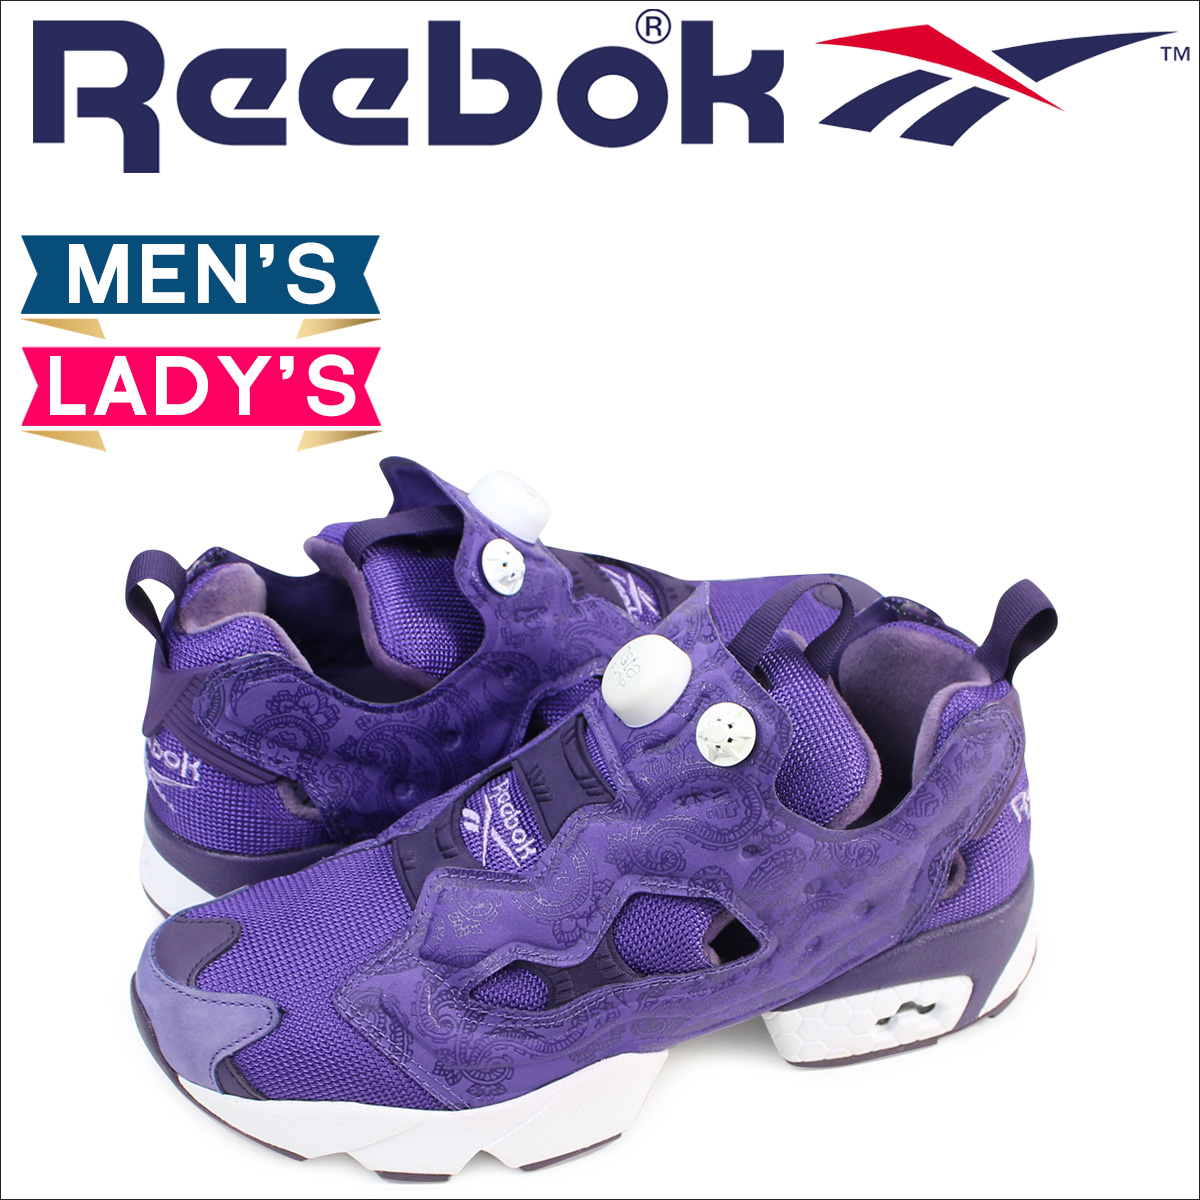 pump reebok ... the aerobics shoes for women, introduced in 1994,  MXPZVDA